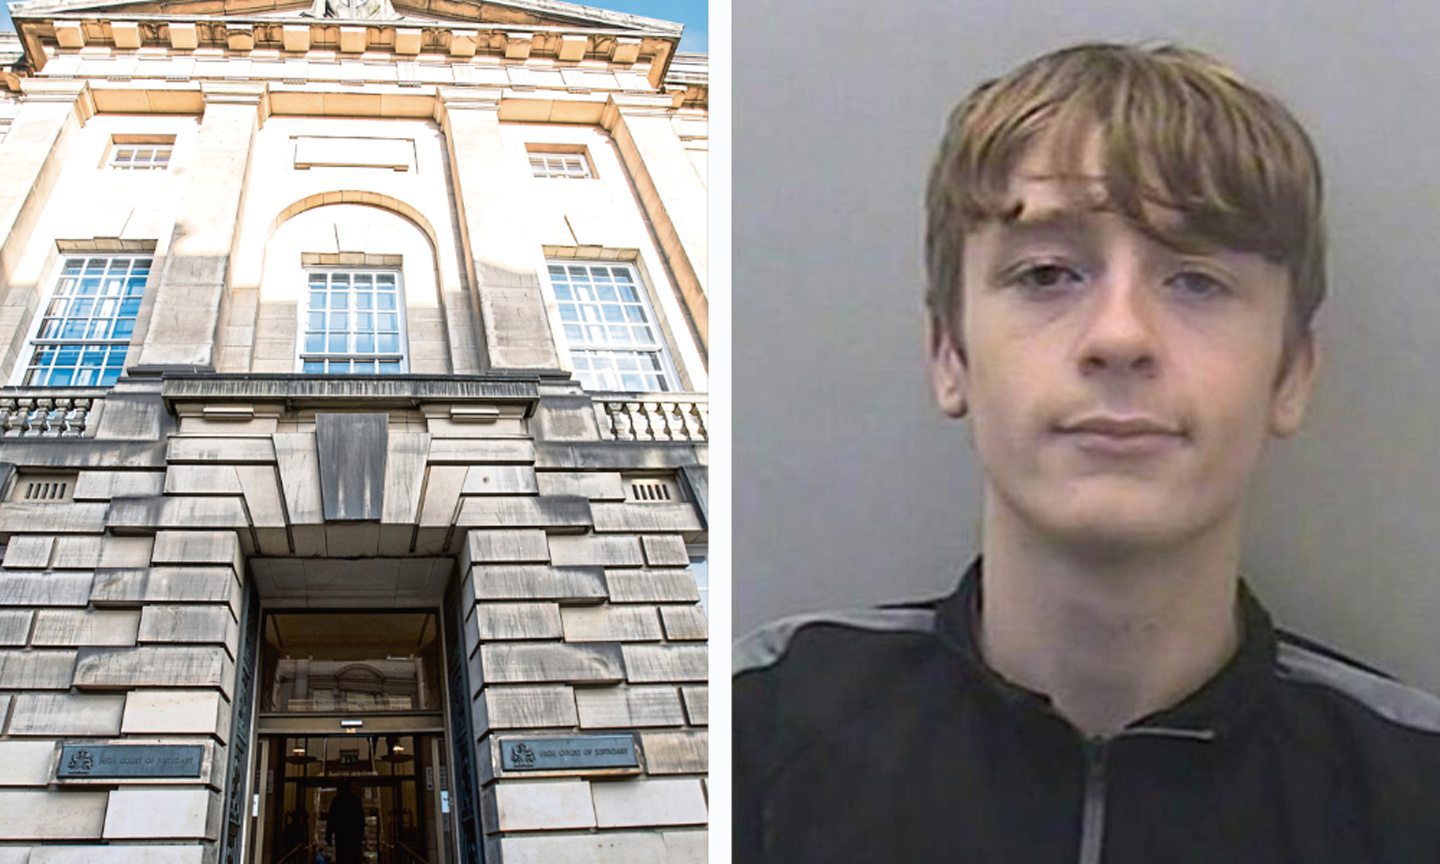 More jail time for 'appalling' north-east drug dealer from Liverpool